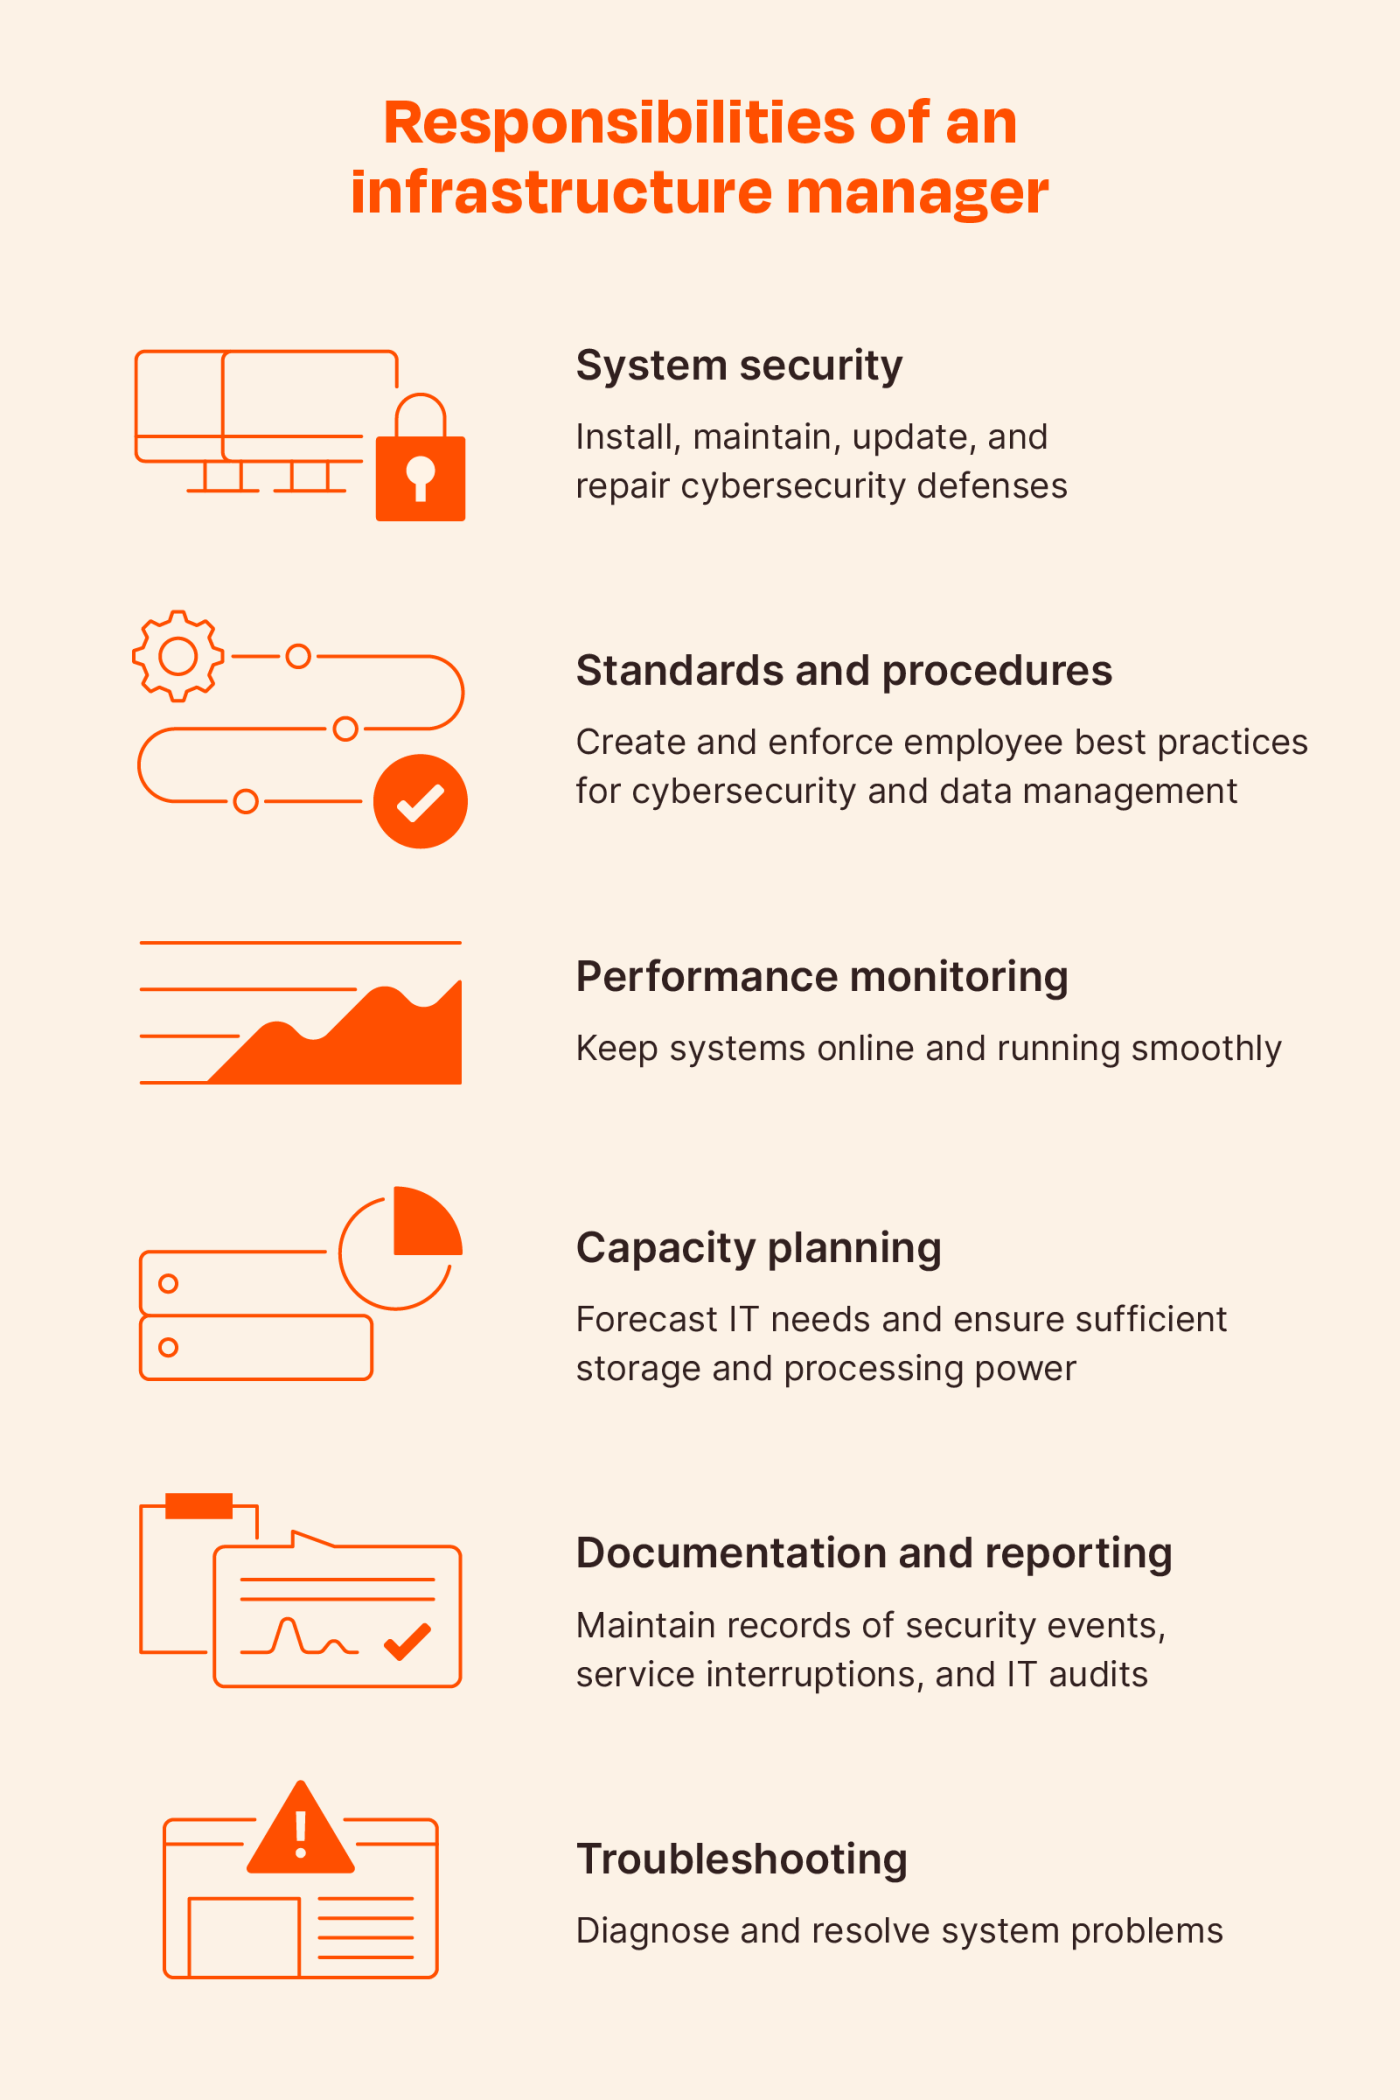 Graphic illustrating the various responsibilities of an infrastructure manager such as capacity planning and performance monitoring